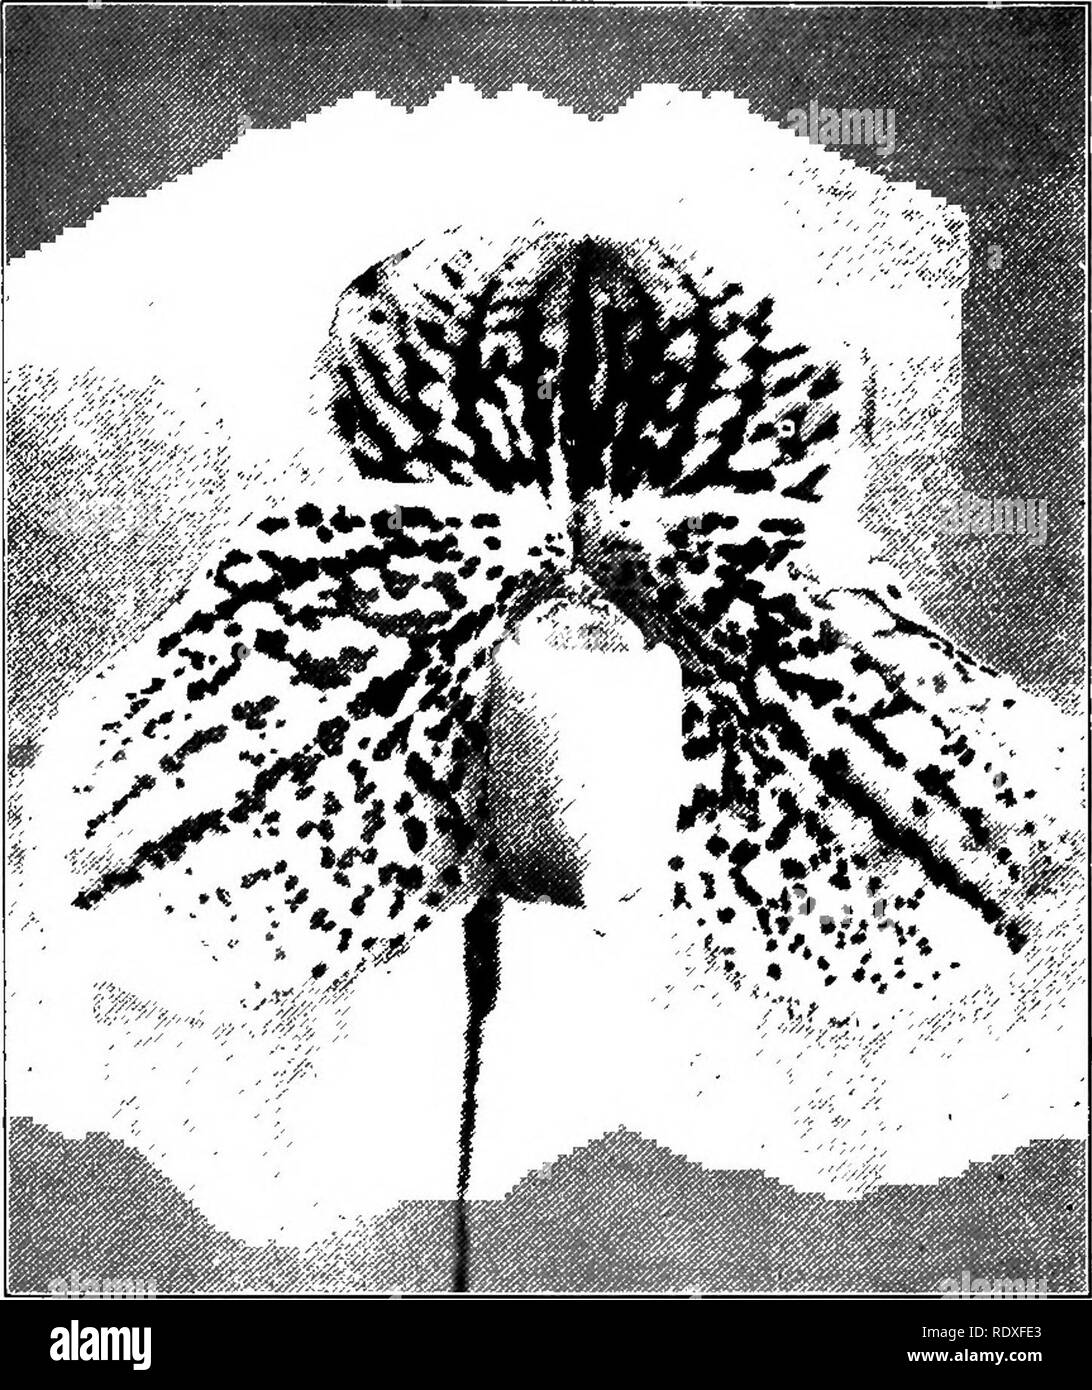 . The Book of gardening; a handbook of horticulture. Gardening; Horticulture. ON ORCHIDS. 601 it does well in the cool house. C. callosum Sandera is another albino, represented in Fig. 377. Fig. 378 represents C. Rothschildianum, undoubtedly the finest species among the so-called New Guinea section of Cypripediums. It has. Fig. 382.—Cypripedium Godefroy^; ledcochilum. proved a most useful subject for hybridisation purposes. Fig. 379 represents C. Arthurianum, and Fig. 380 C. regina, which belong to the C. Fairieamtm section of hybrids, and must remain among the most valuable of hybrid Orchids, Stock Photo